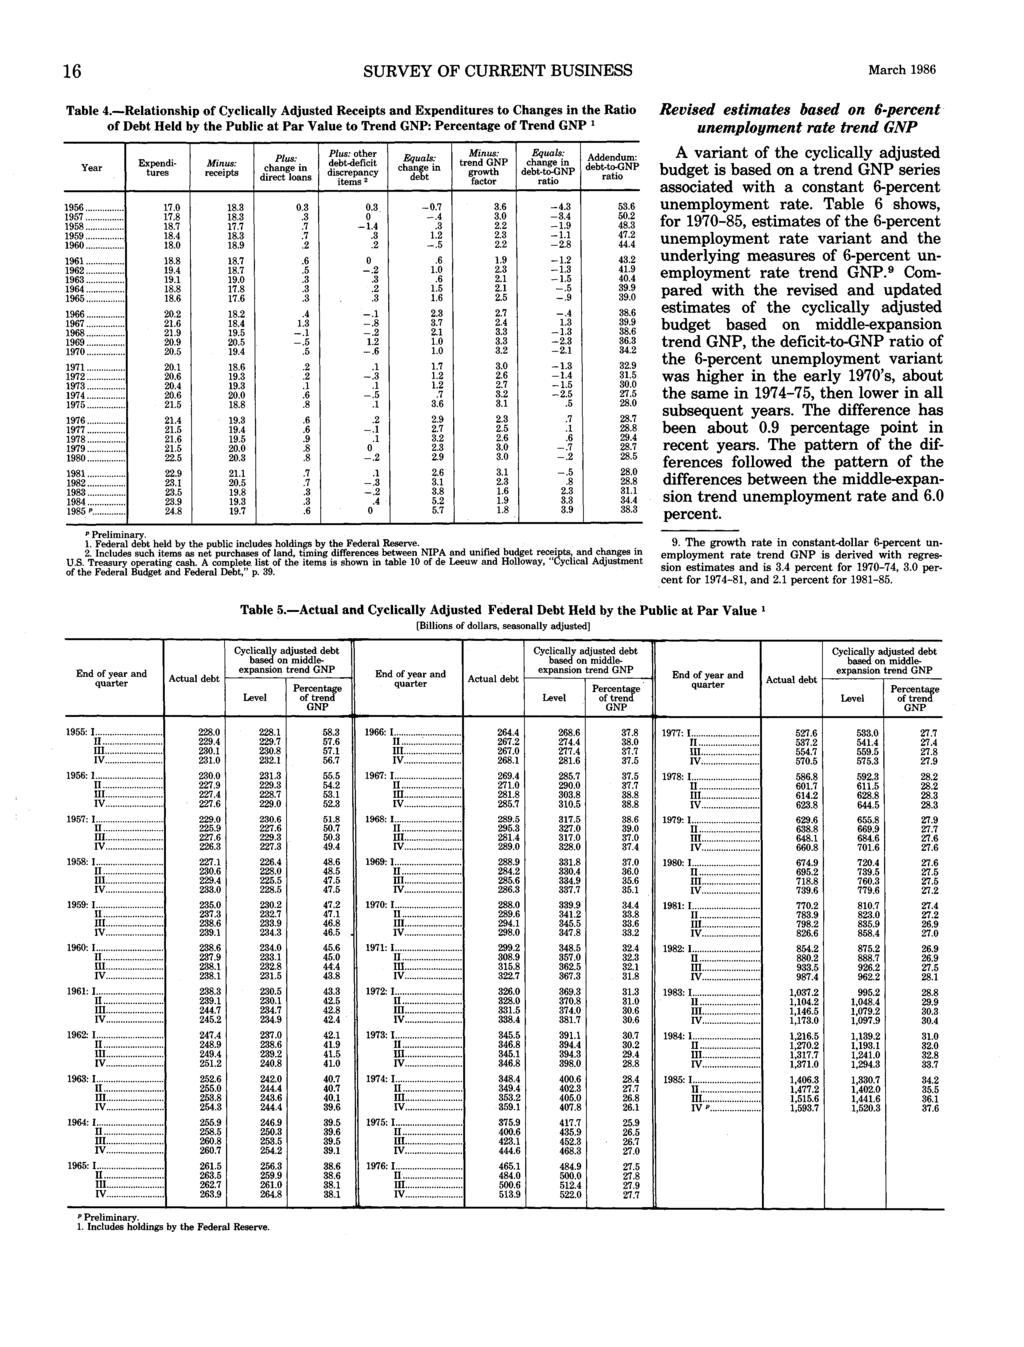 Federal Resee Bank St. Louis 1 SURVEY OF CURRENT BUSINESS Table 4.